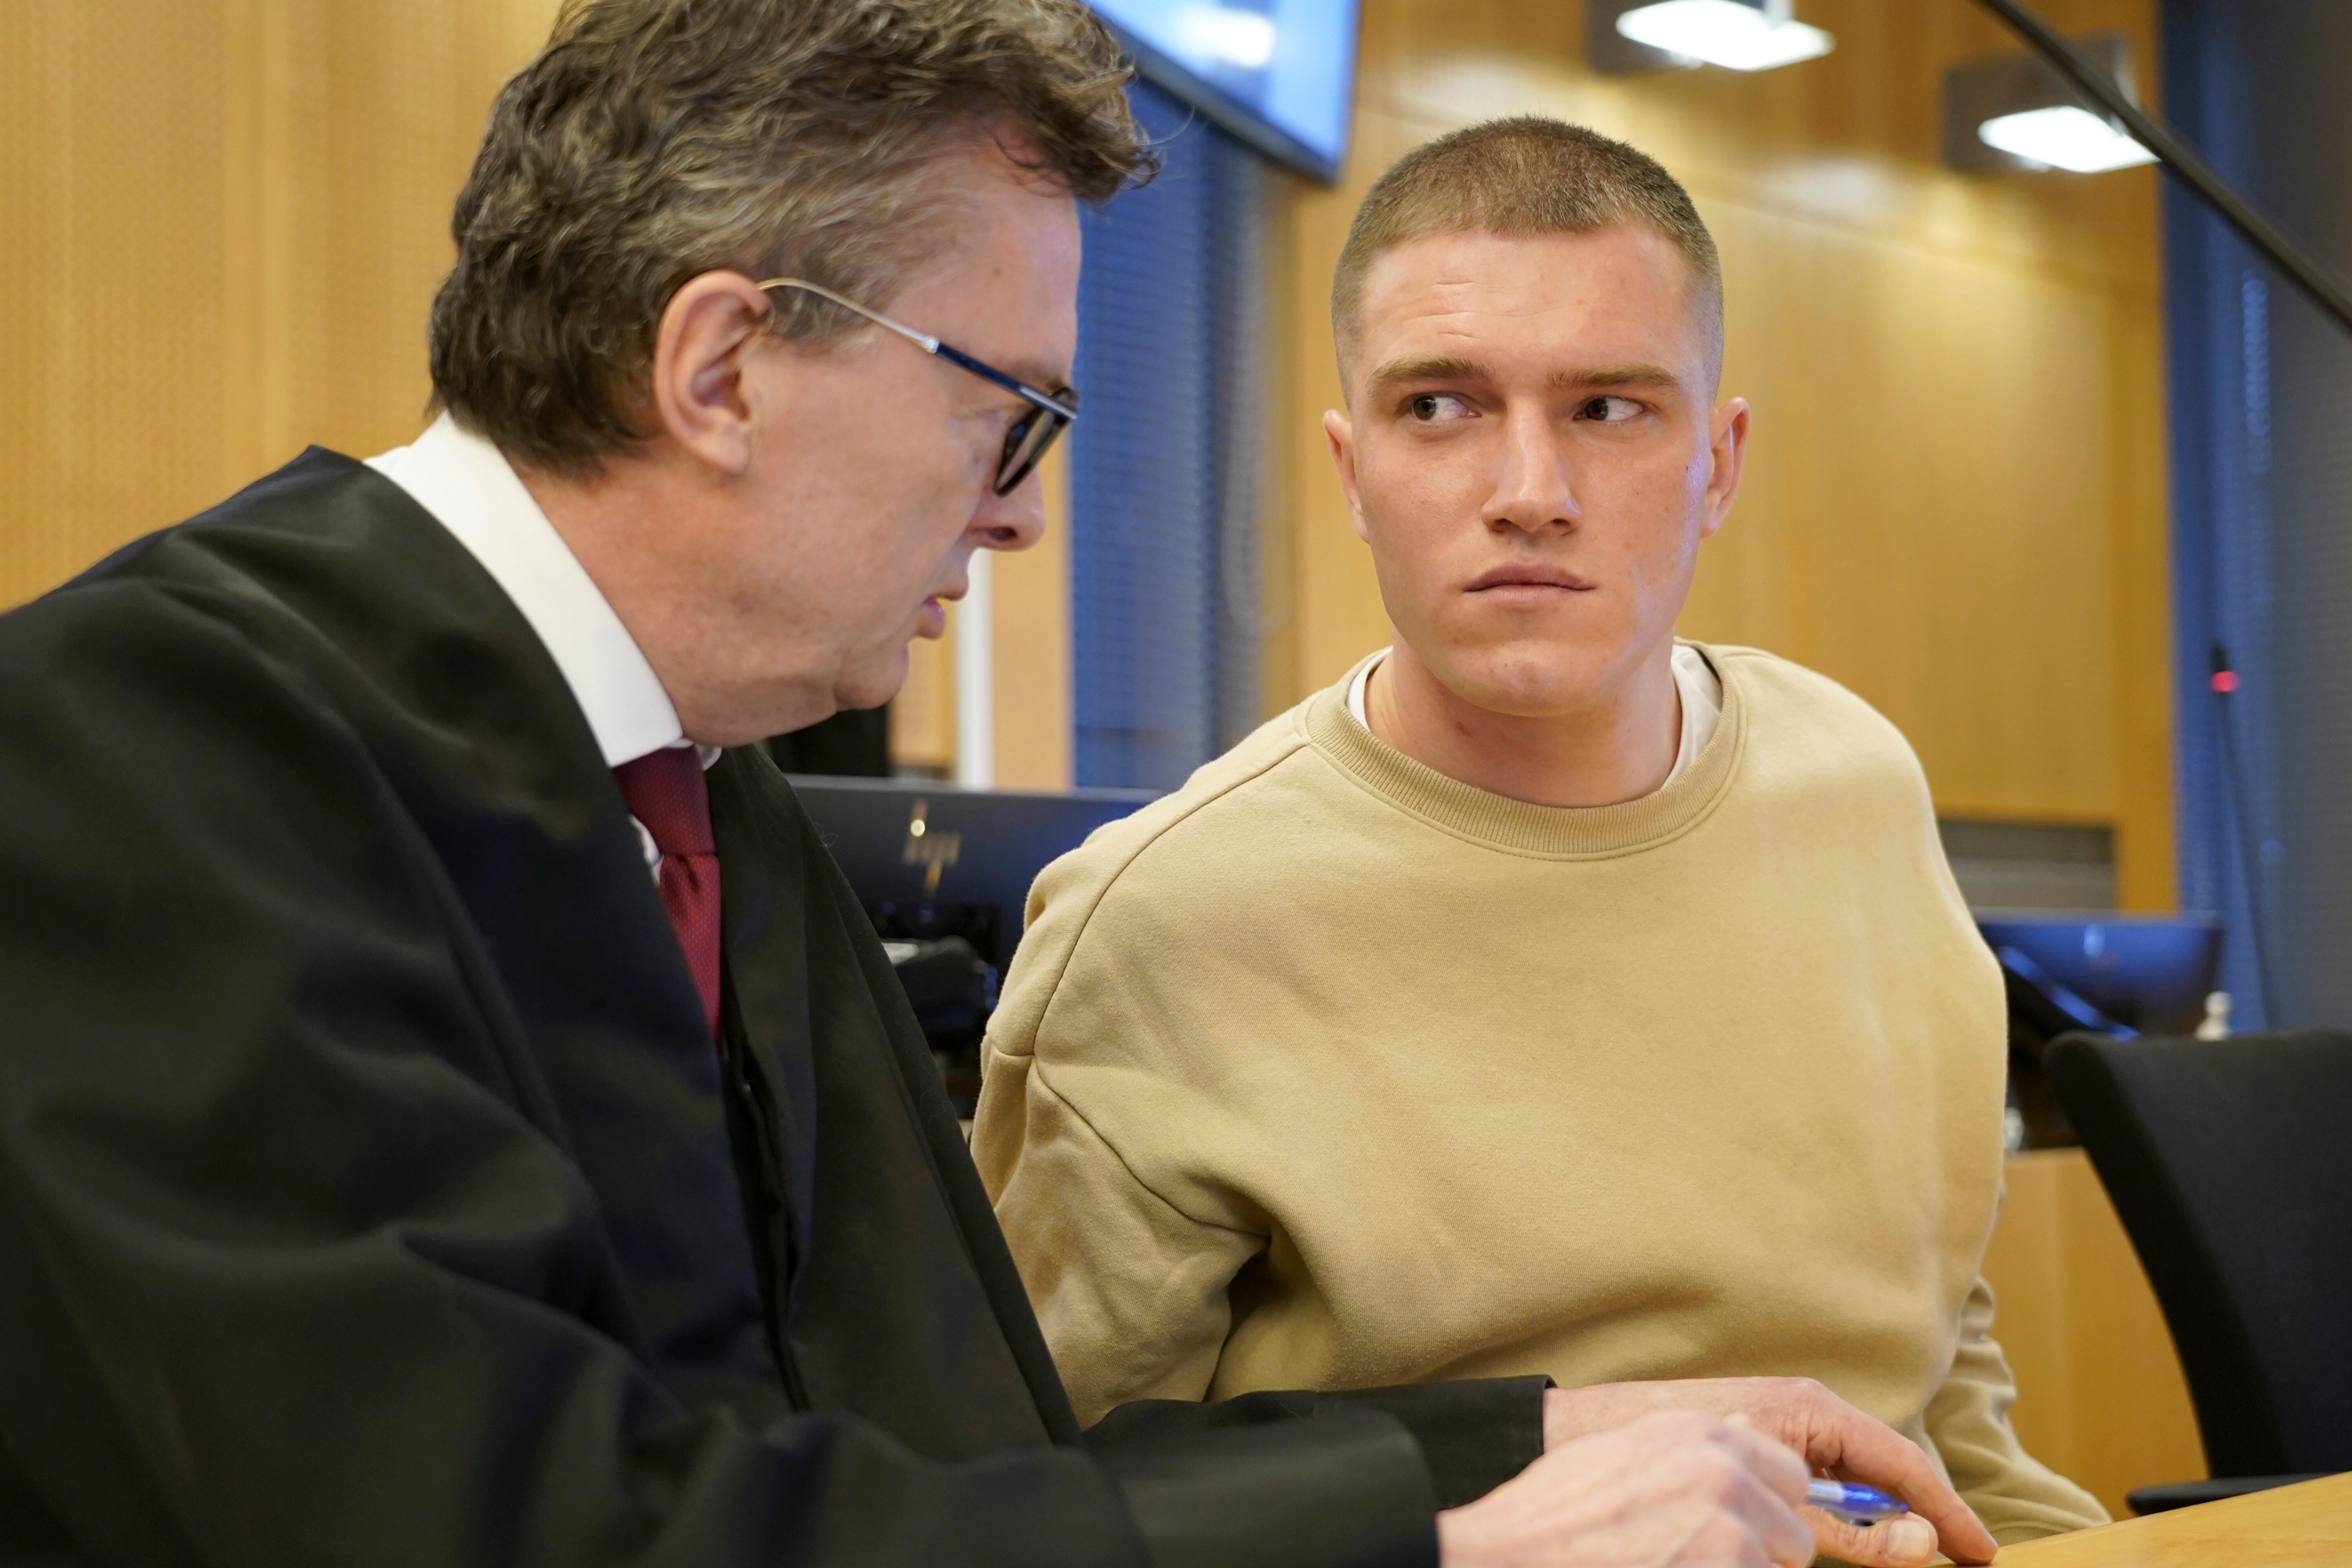 Former commander in the Wagner mercenary group Andrey Medvedev, pictured on the right, listens to his lawyer Brynjulf Risnes during a court hearing in Oslo, on April 25.